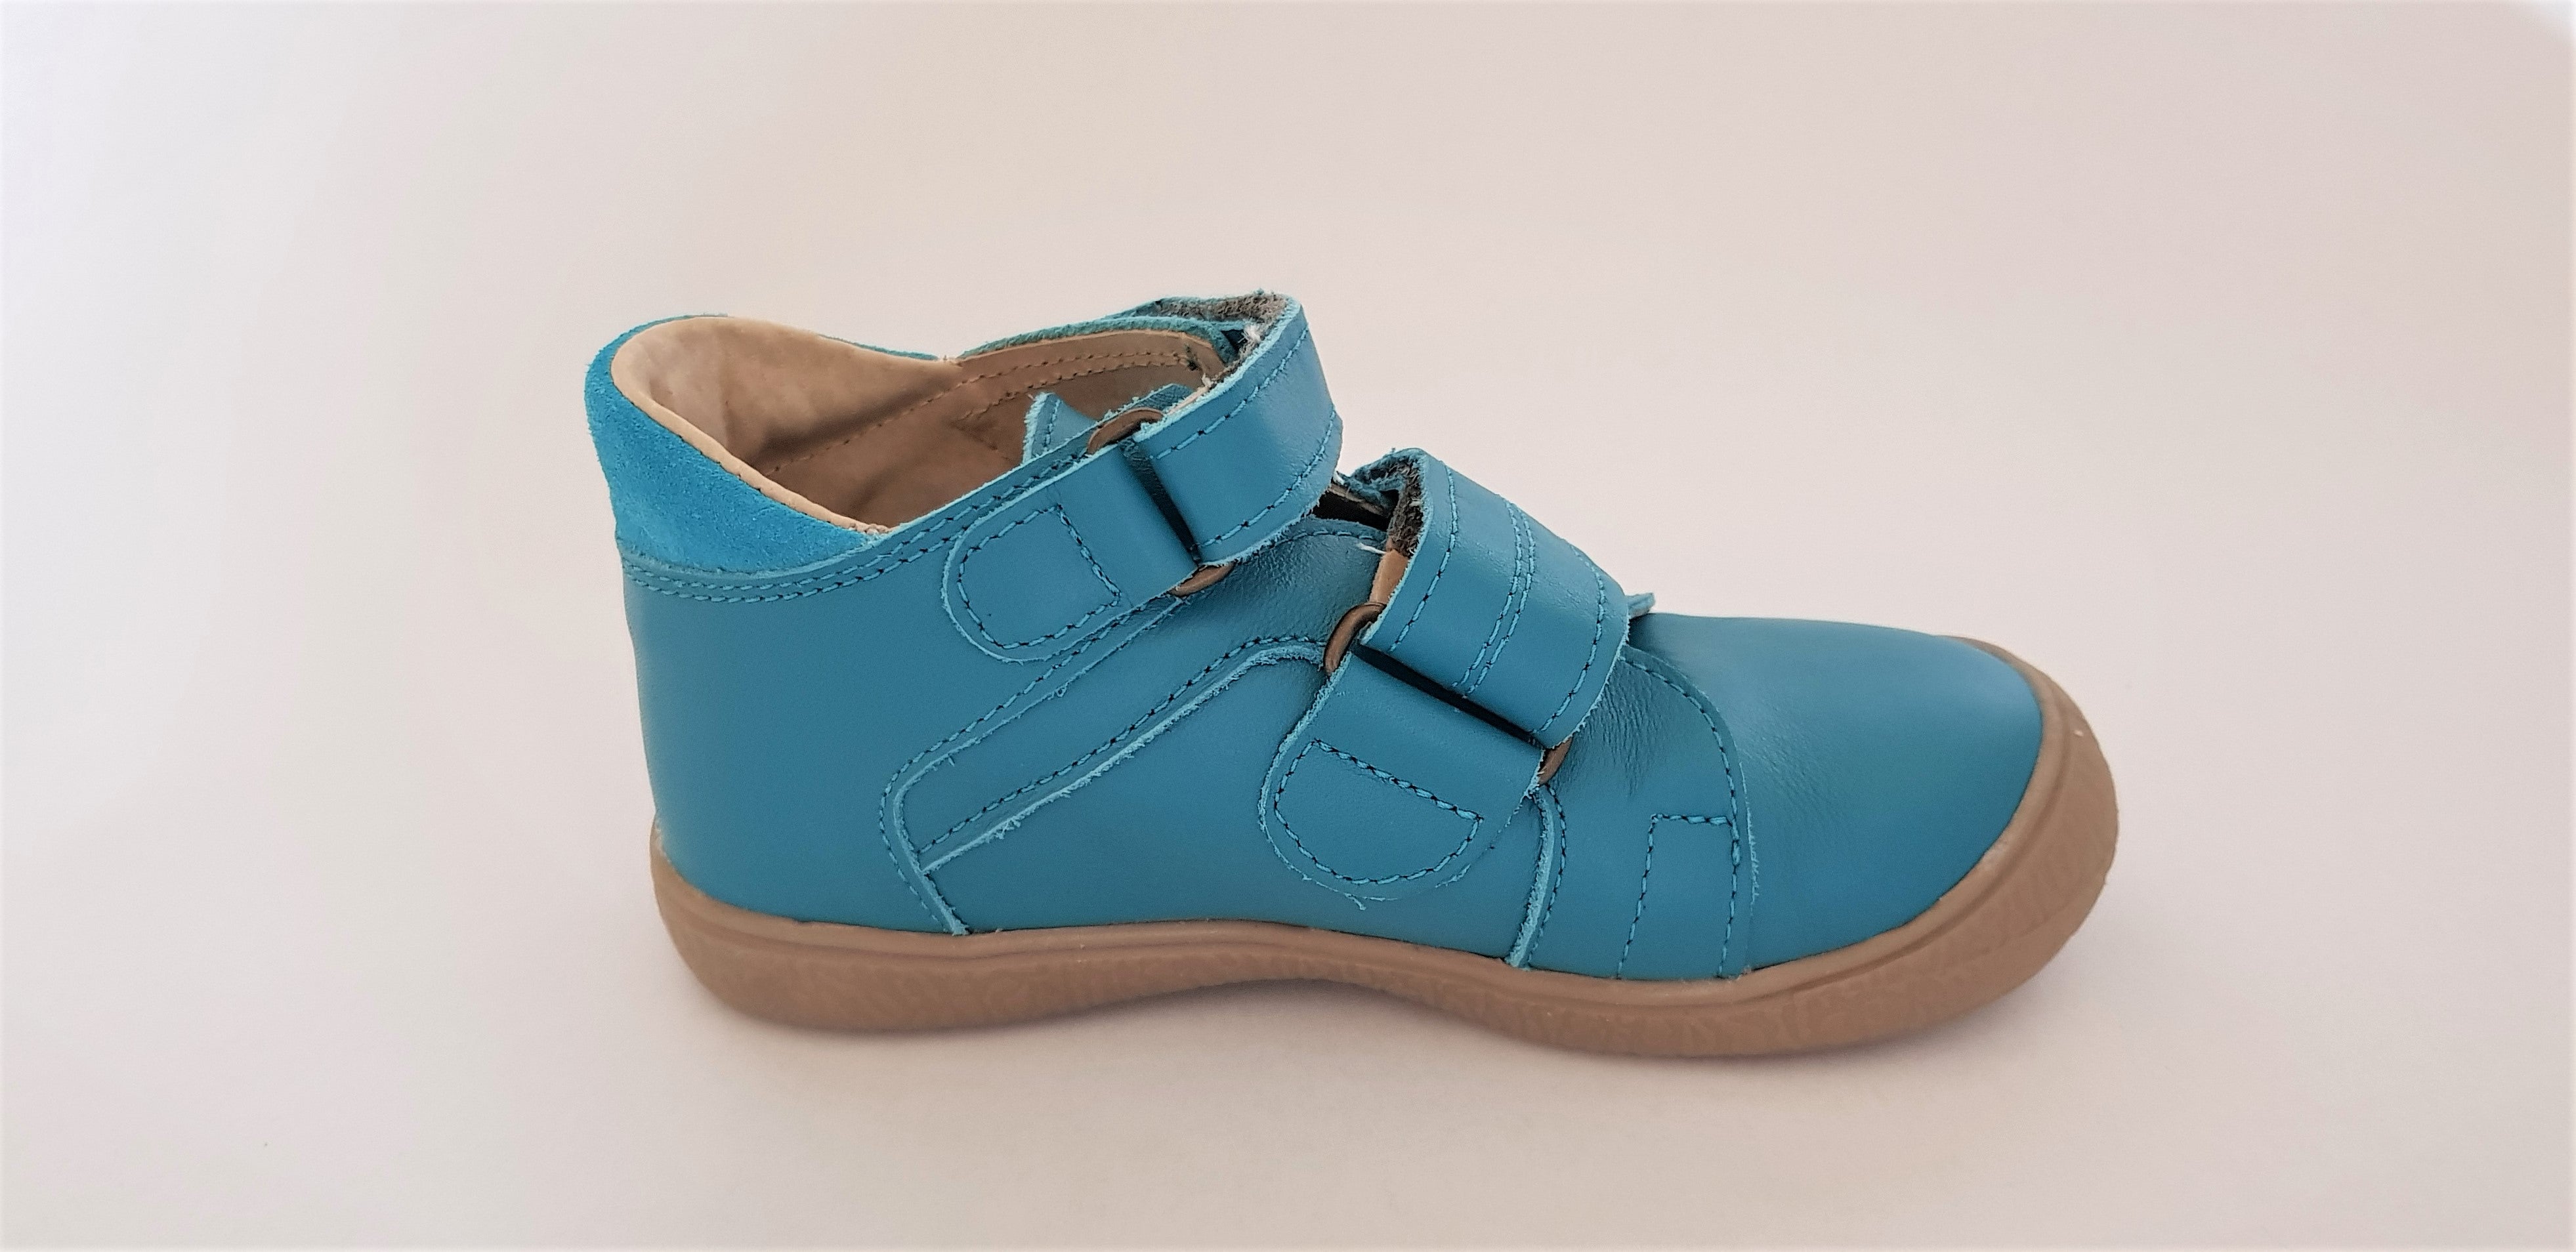 Children's Shoes - Turquoise